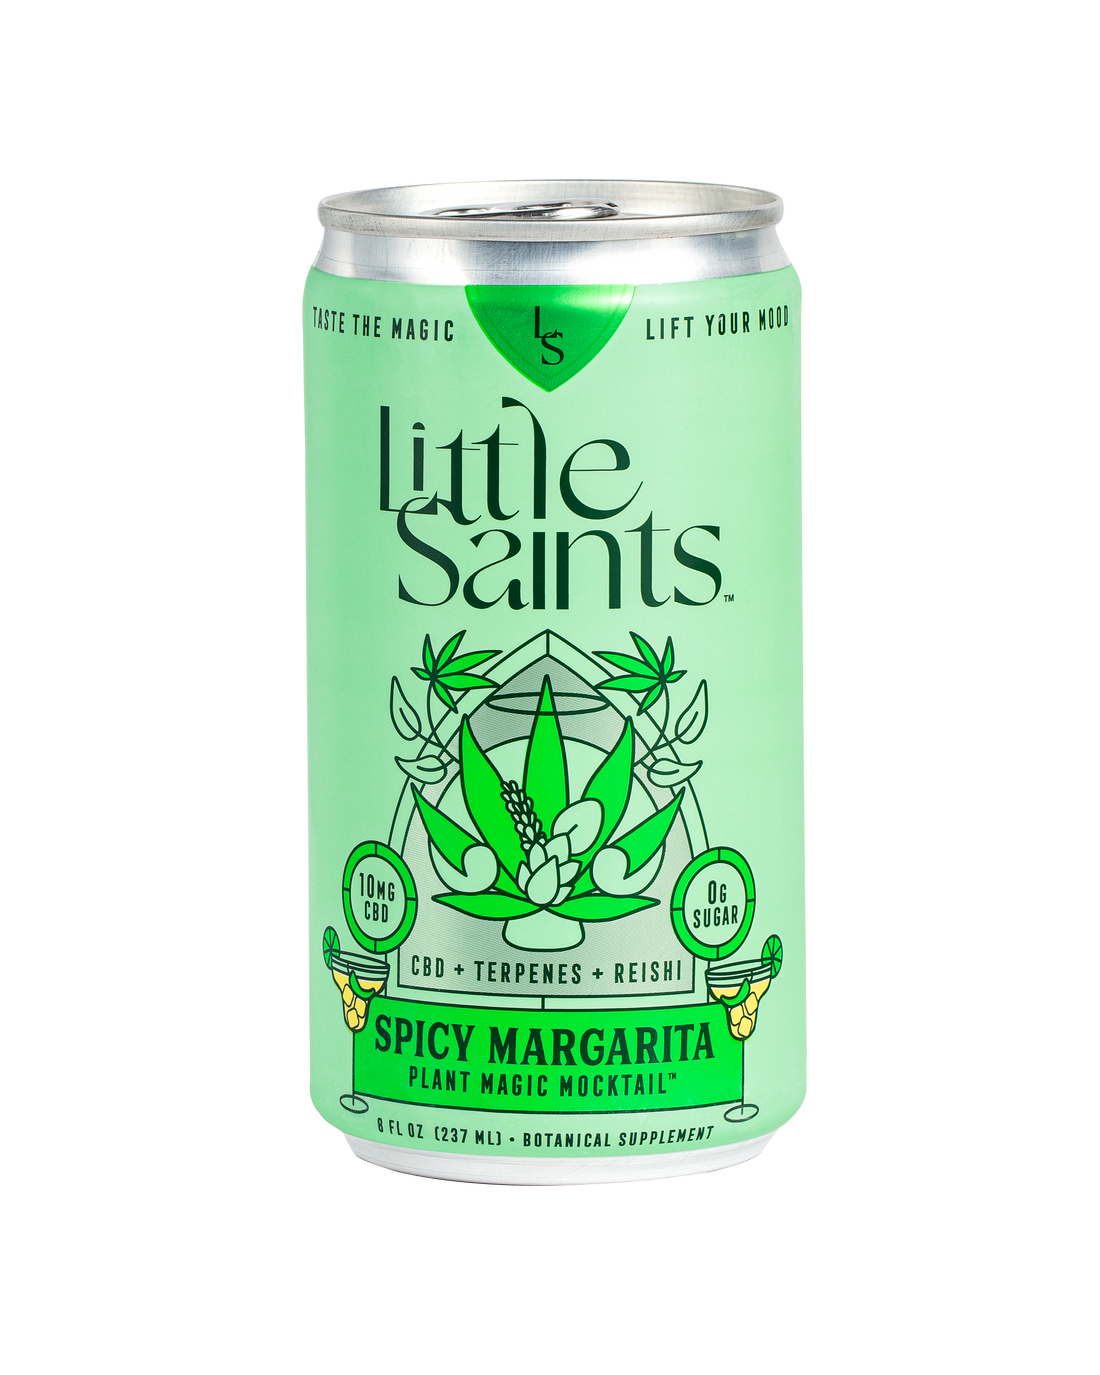 Little Saints - Spicy Margarita Plant Magic Mocktail - 8oz Can - Boisson — Brooklyn's Non-Alcoholic Spirits, Beer, Wine, and Home Bar Shop in Cobble Hill